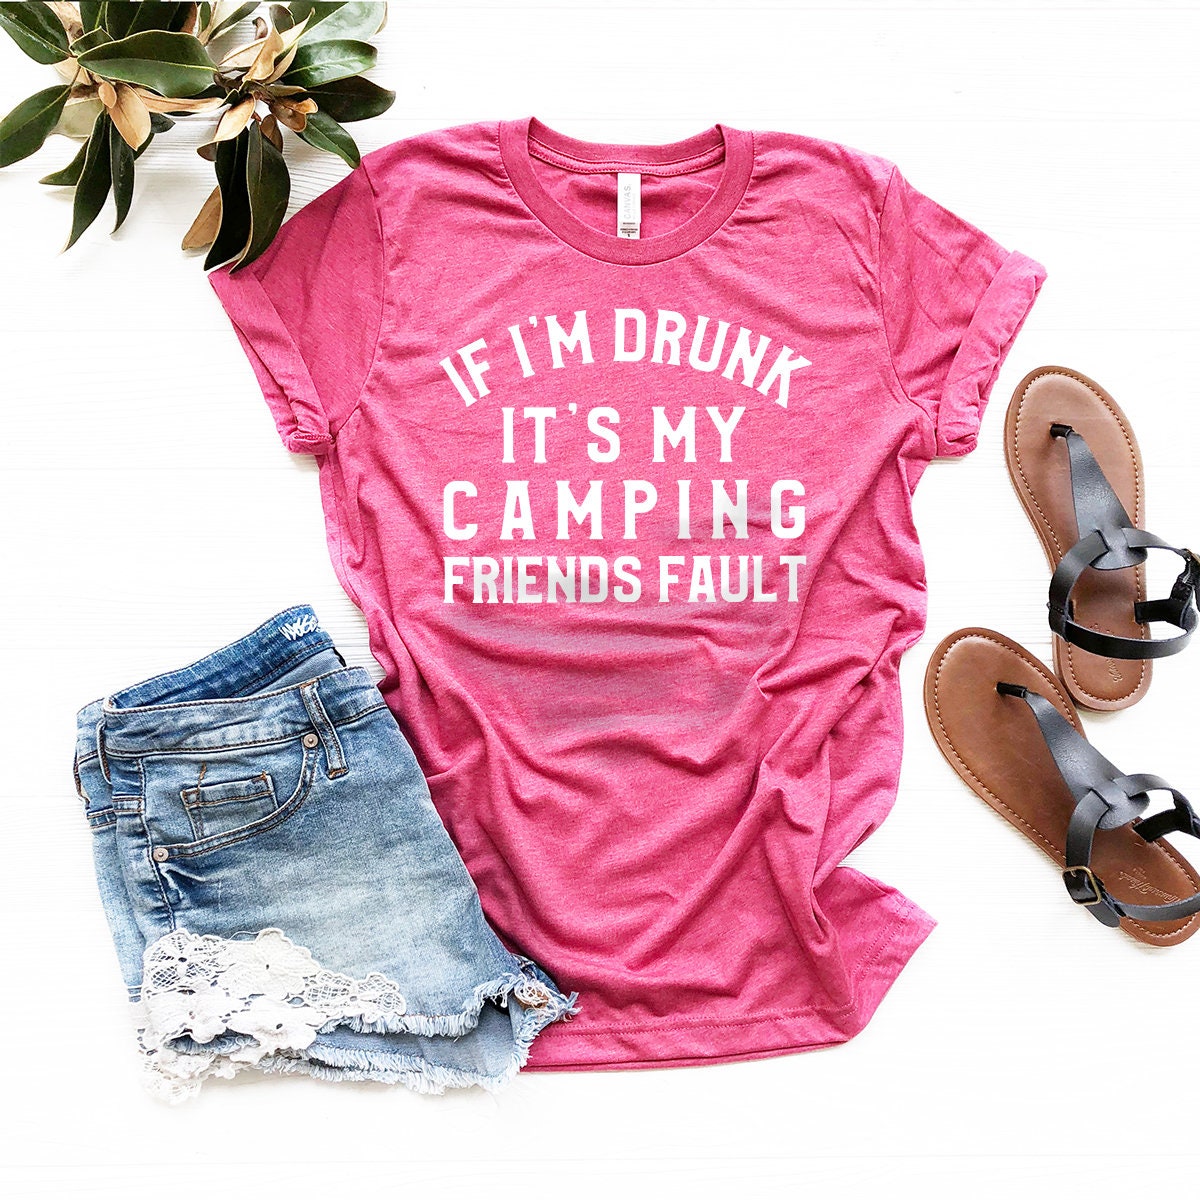 Camping Shirt ,Drinking Shirt, Best Friends Shirt, Funny Drinking Shirt, Yes I Am Drunk It's My Camping Friends Fault - Fastdeliverytees.com